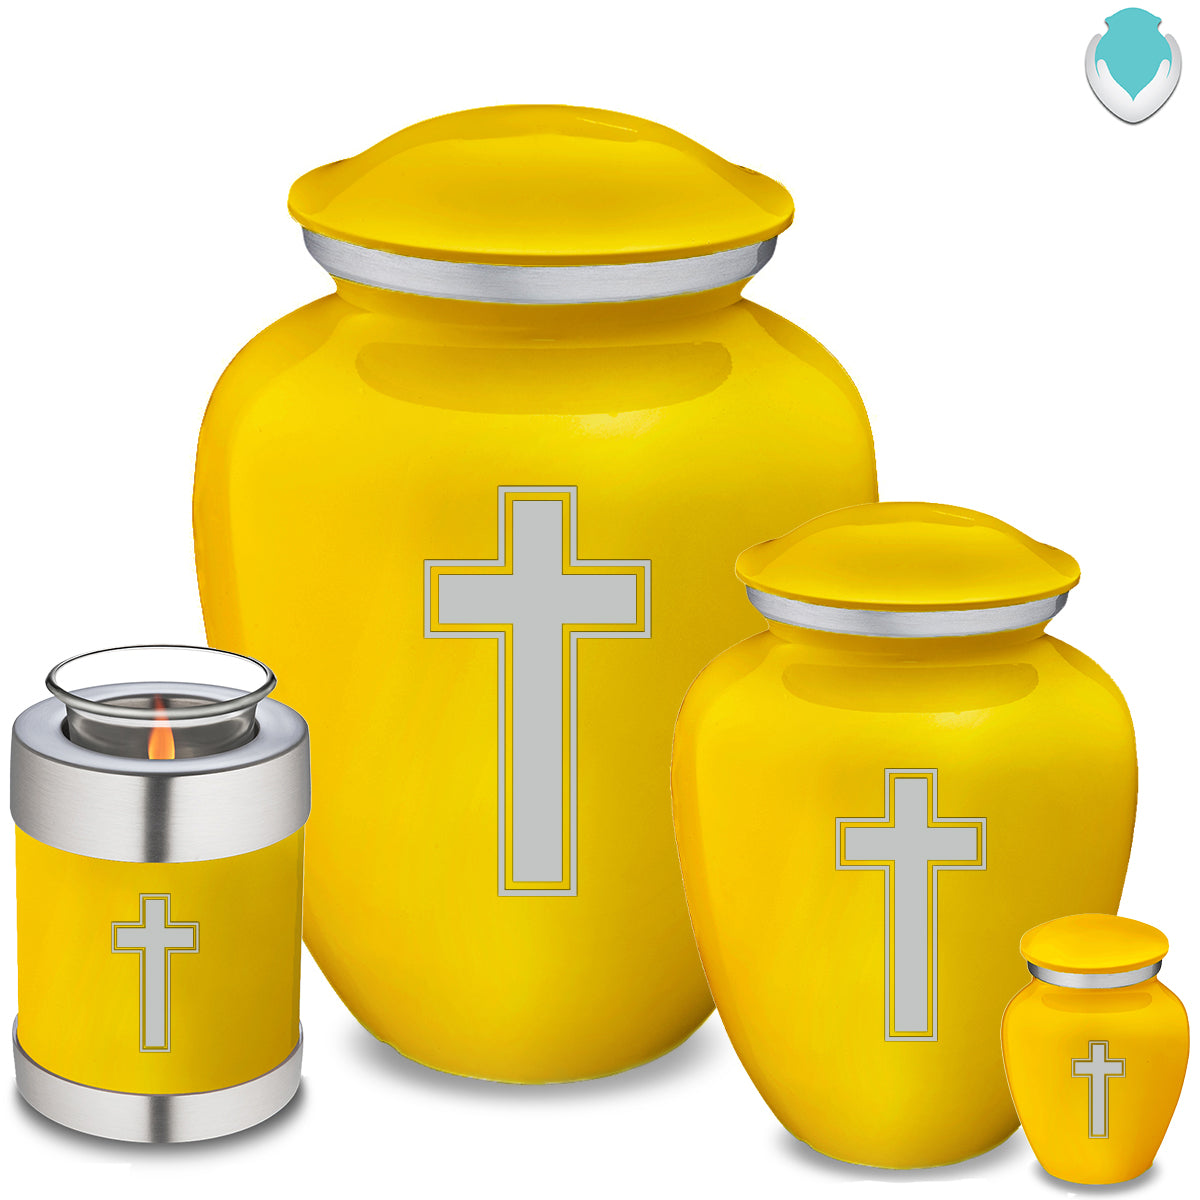 Adult Embrace Yellow Simple Cross Cremation Urn